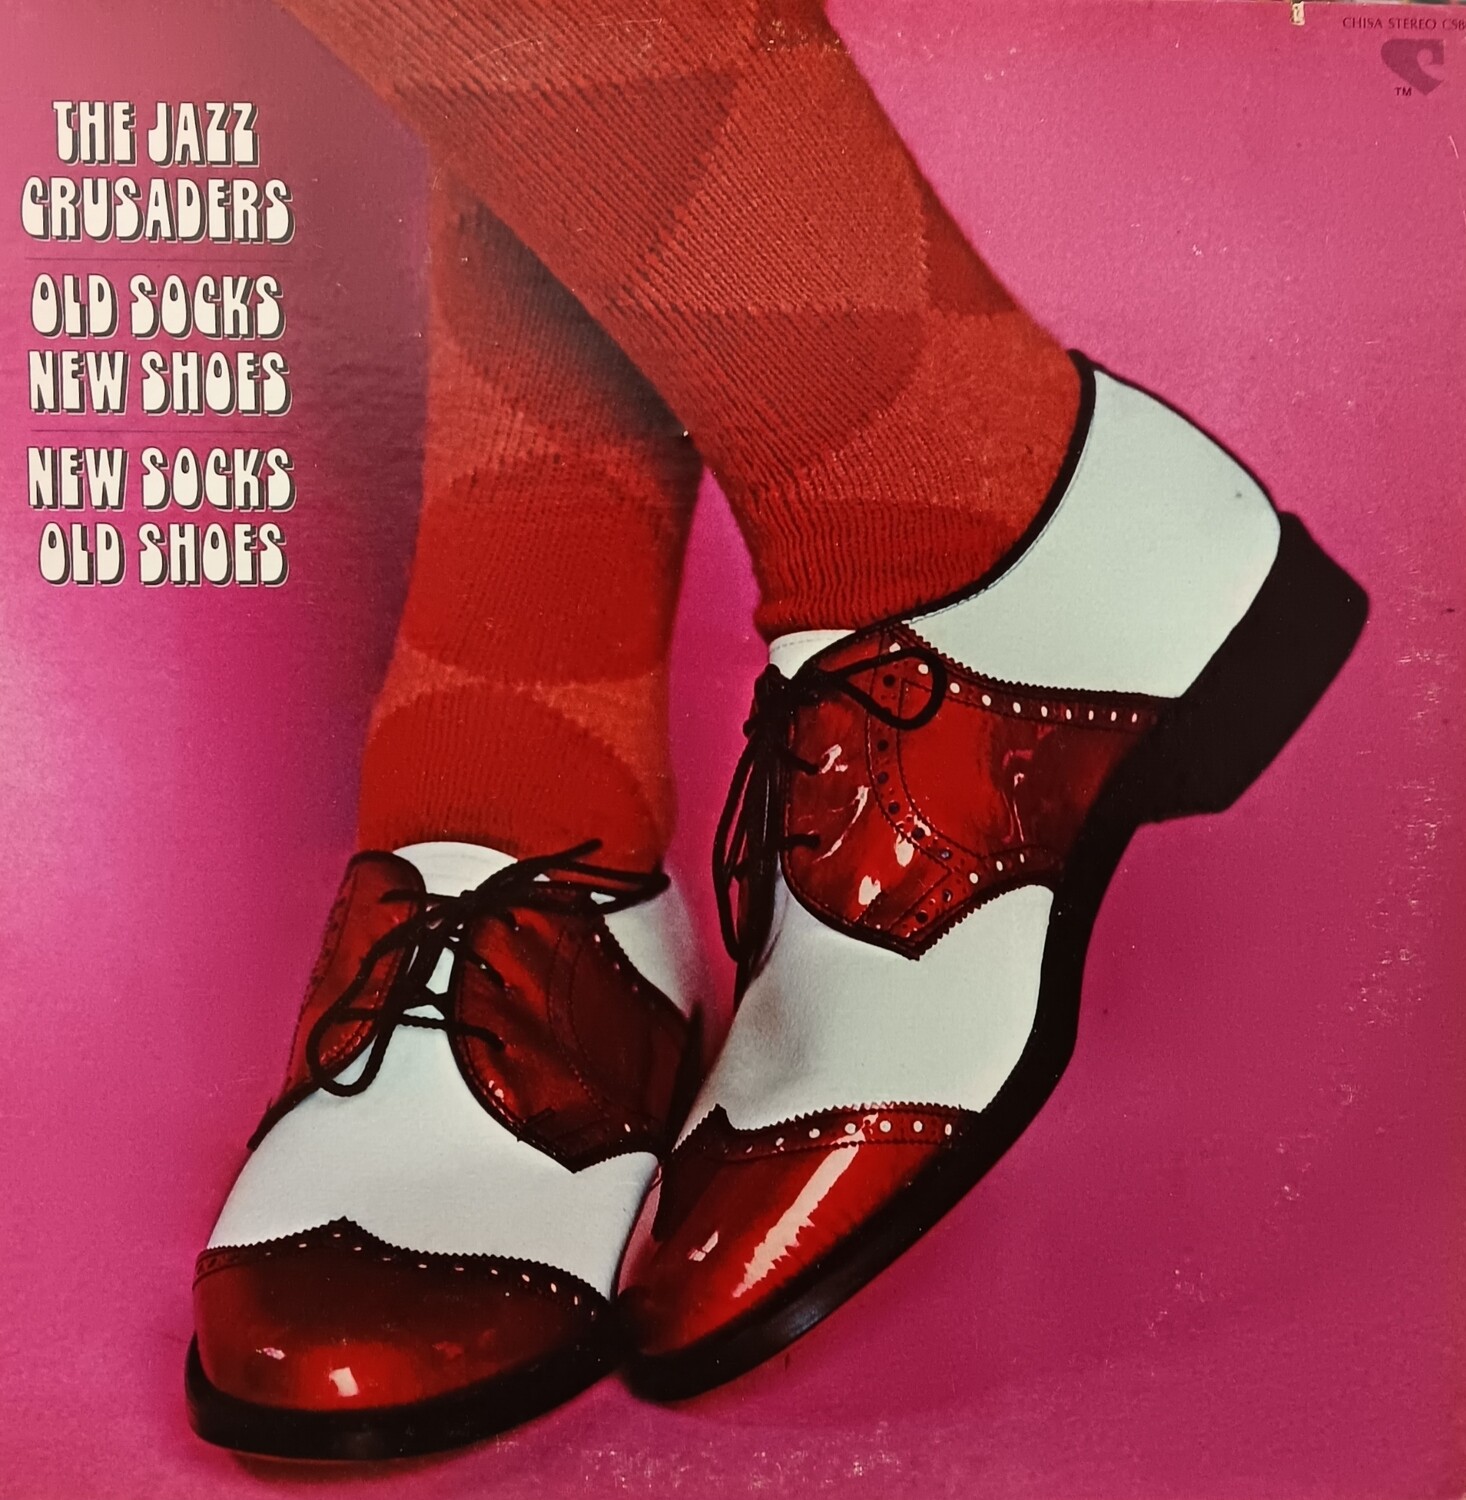 THE JAZZ CRUSADERS - Old socks new shoes New socks old shoes